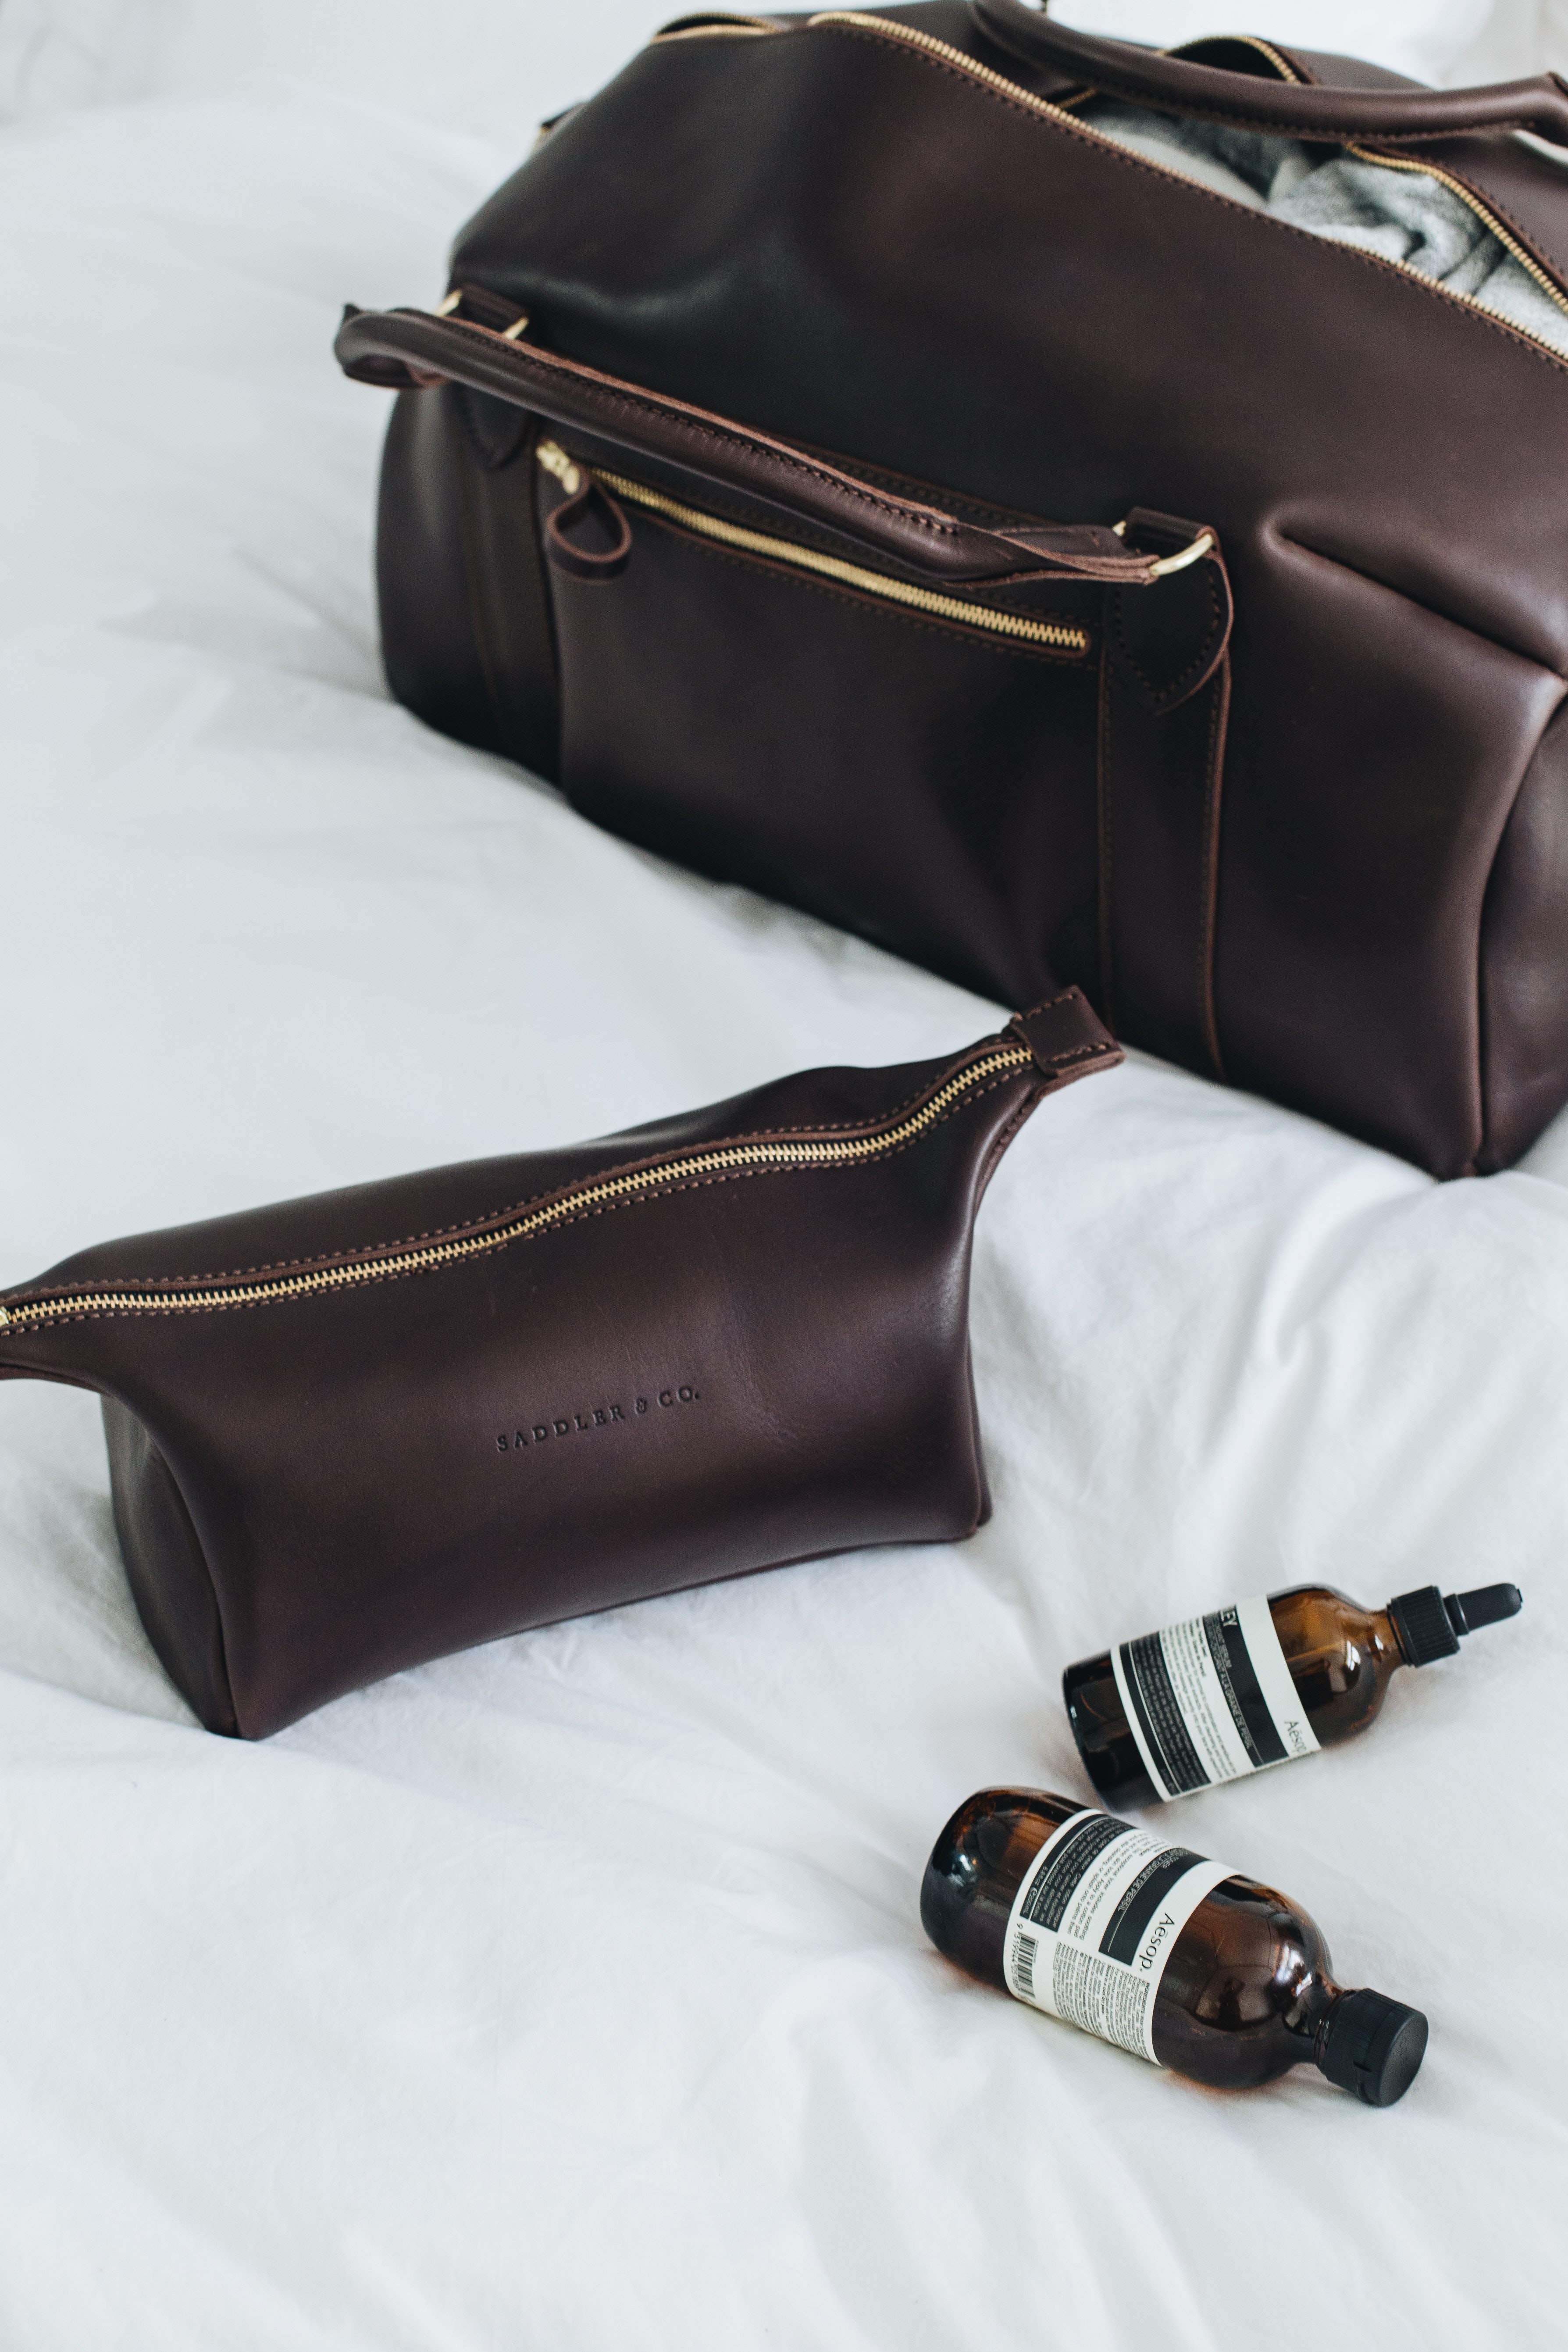 Saddler and Co Leather Toiletry Bag